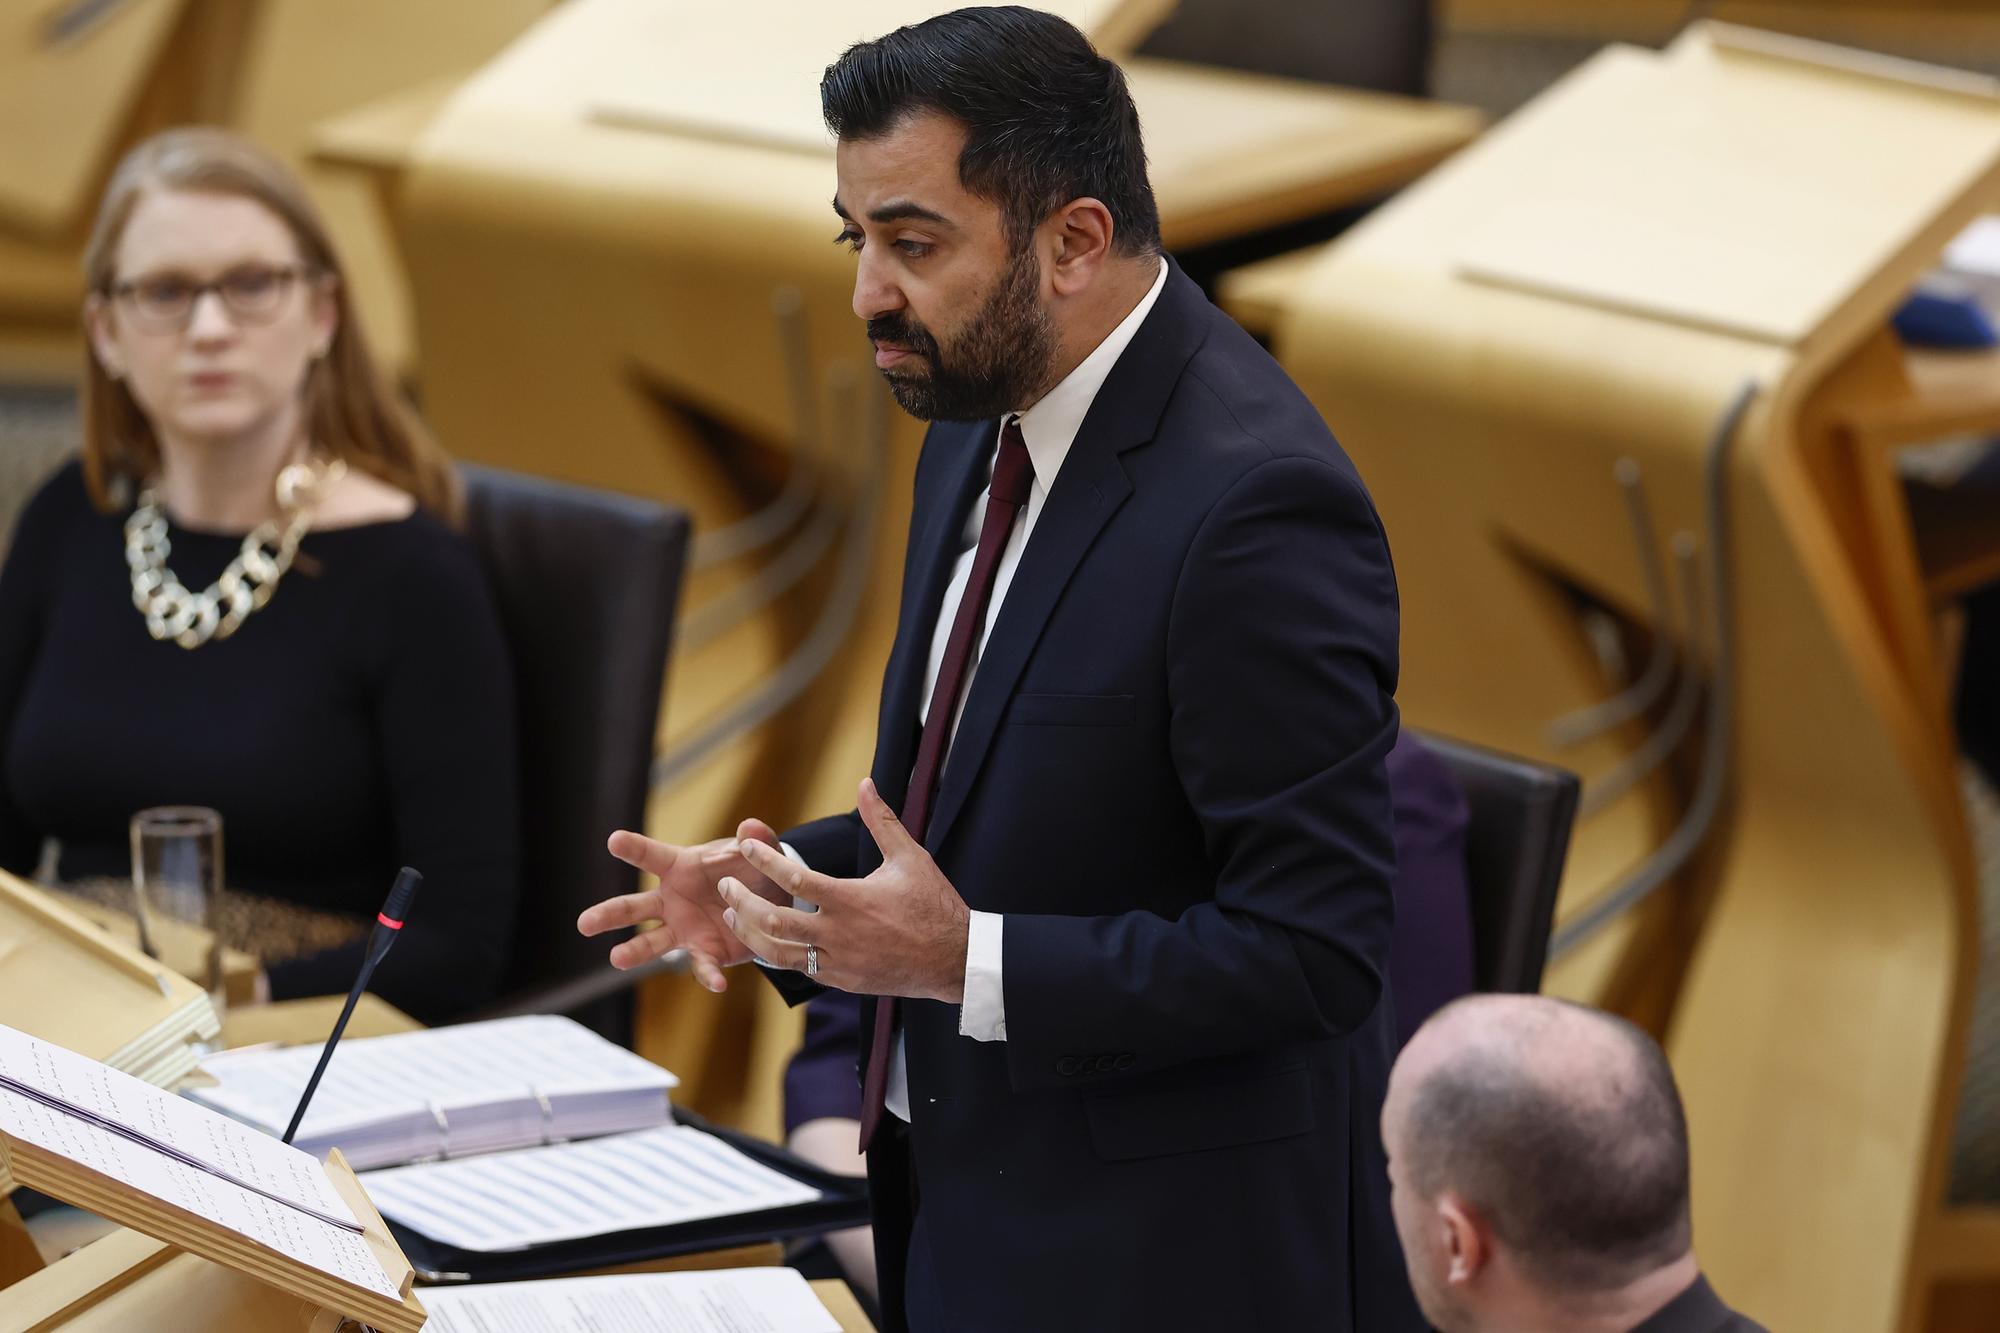 north sea oil and gas: humza yousaf issues 'stand up' declaration at fmqs amid row over labour's plans for windfall tax